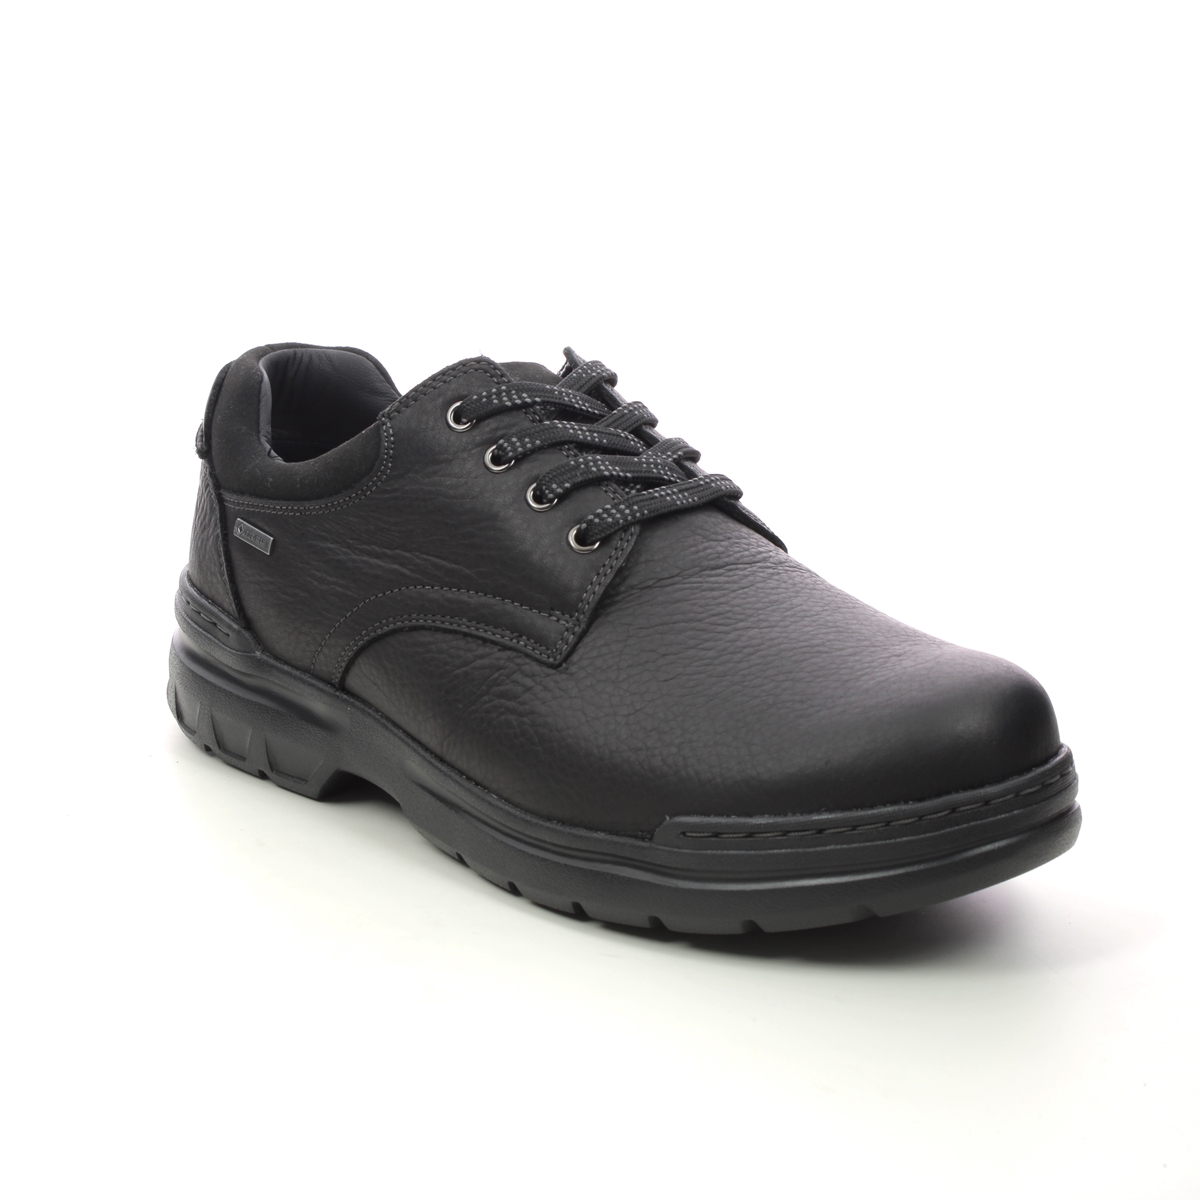 Clarks Rockie Walk Gtx Black Leather Mens Comfort Shoes 734648H In Size 12 In Plain Black Leather H Width Fitting Extra Wide